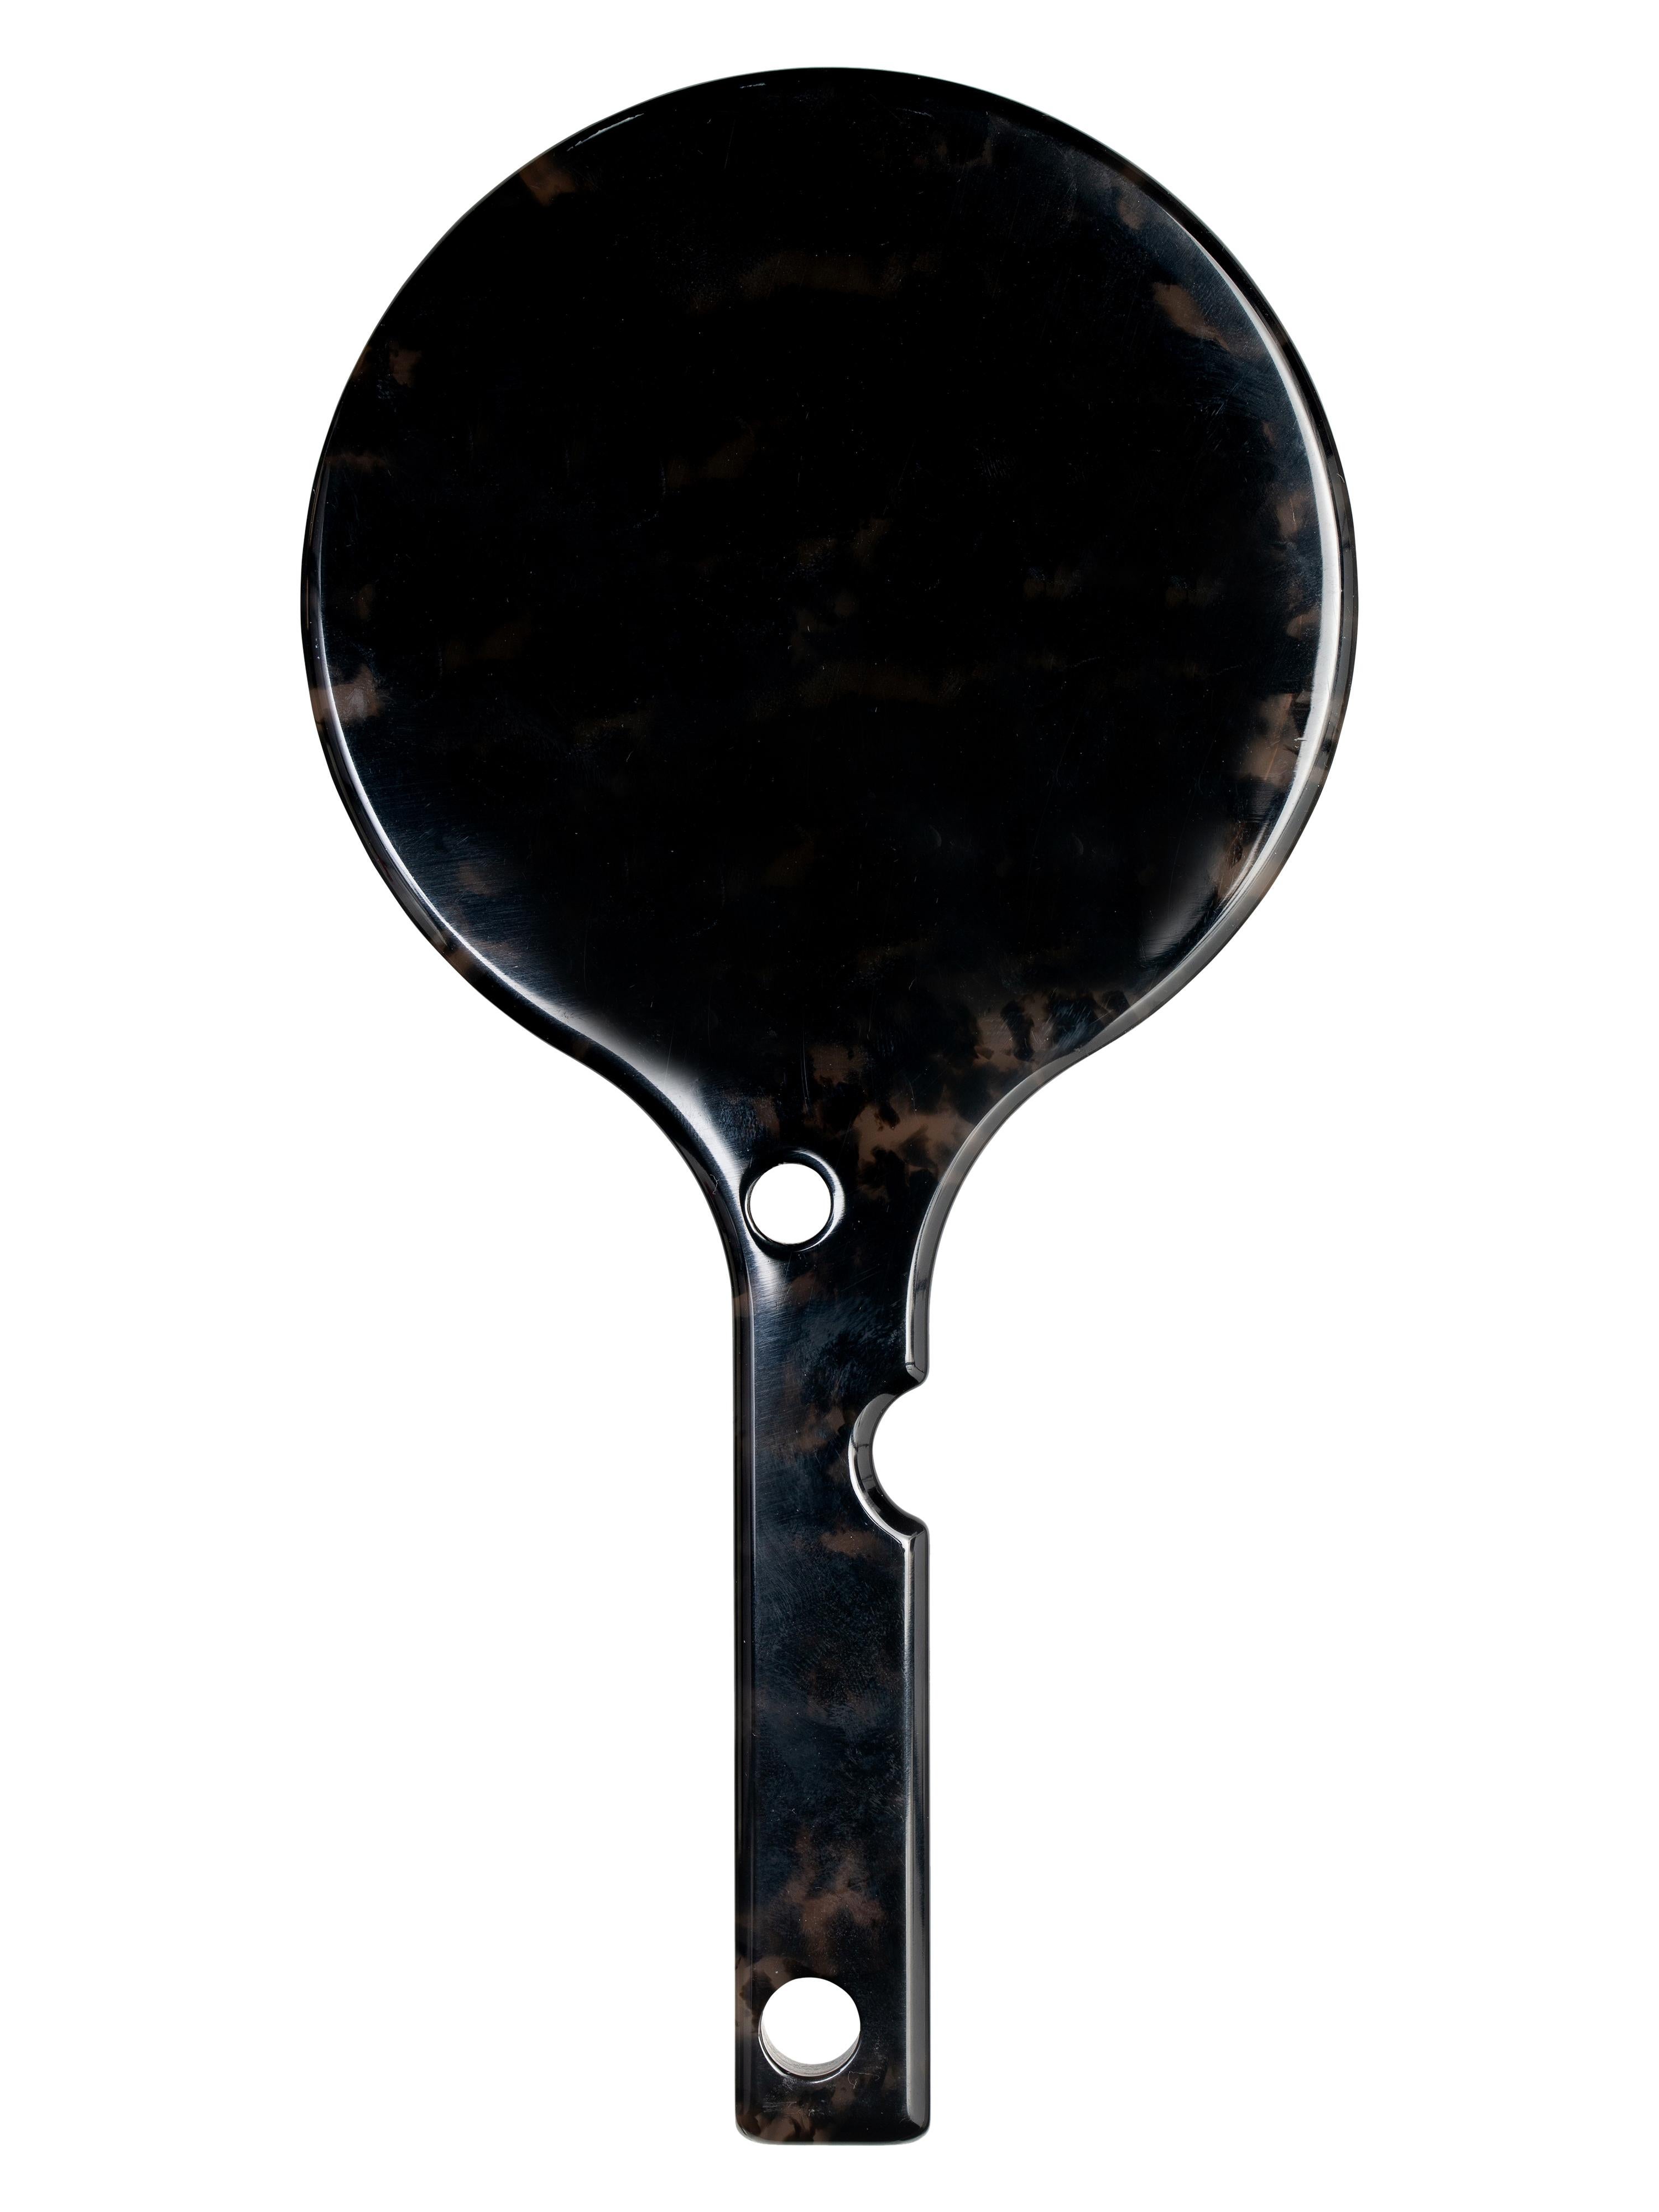 Round Hand mirror with Havana black and brown marble acetate body. Handle is holed with man swimming logo gold impressed.
By Virgil Abloh
Dimensions: 10.7 W x 21 H
This item is only available to be purchased and shipped to the United States.